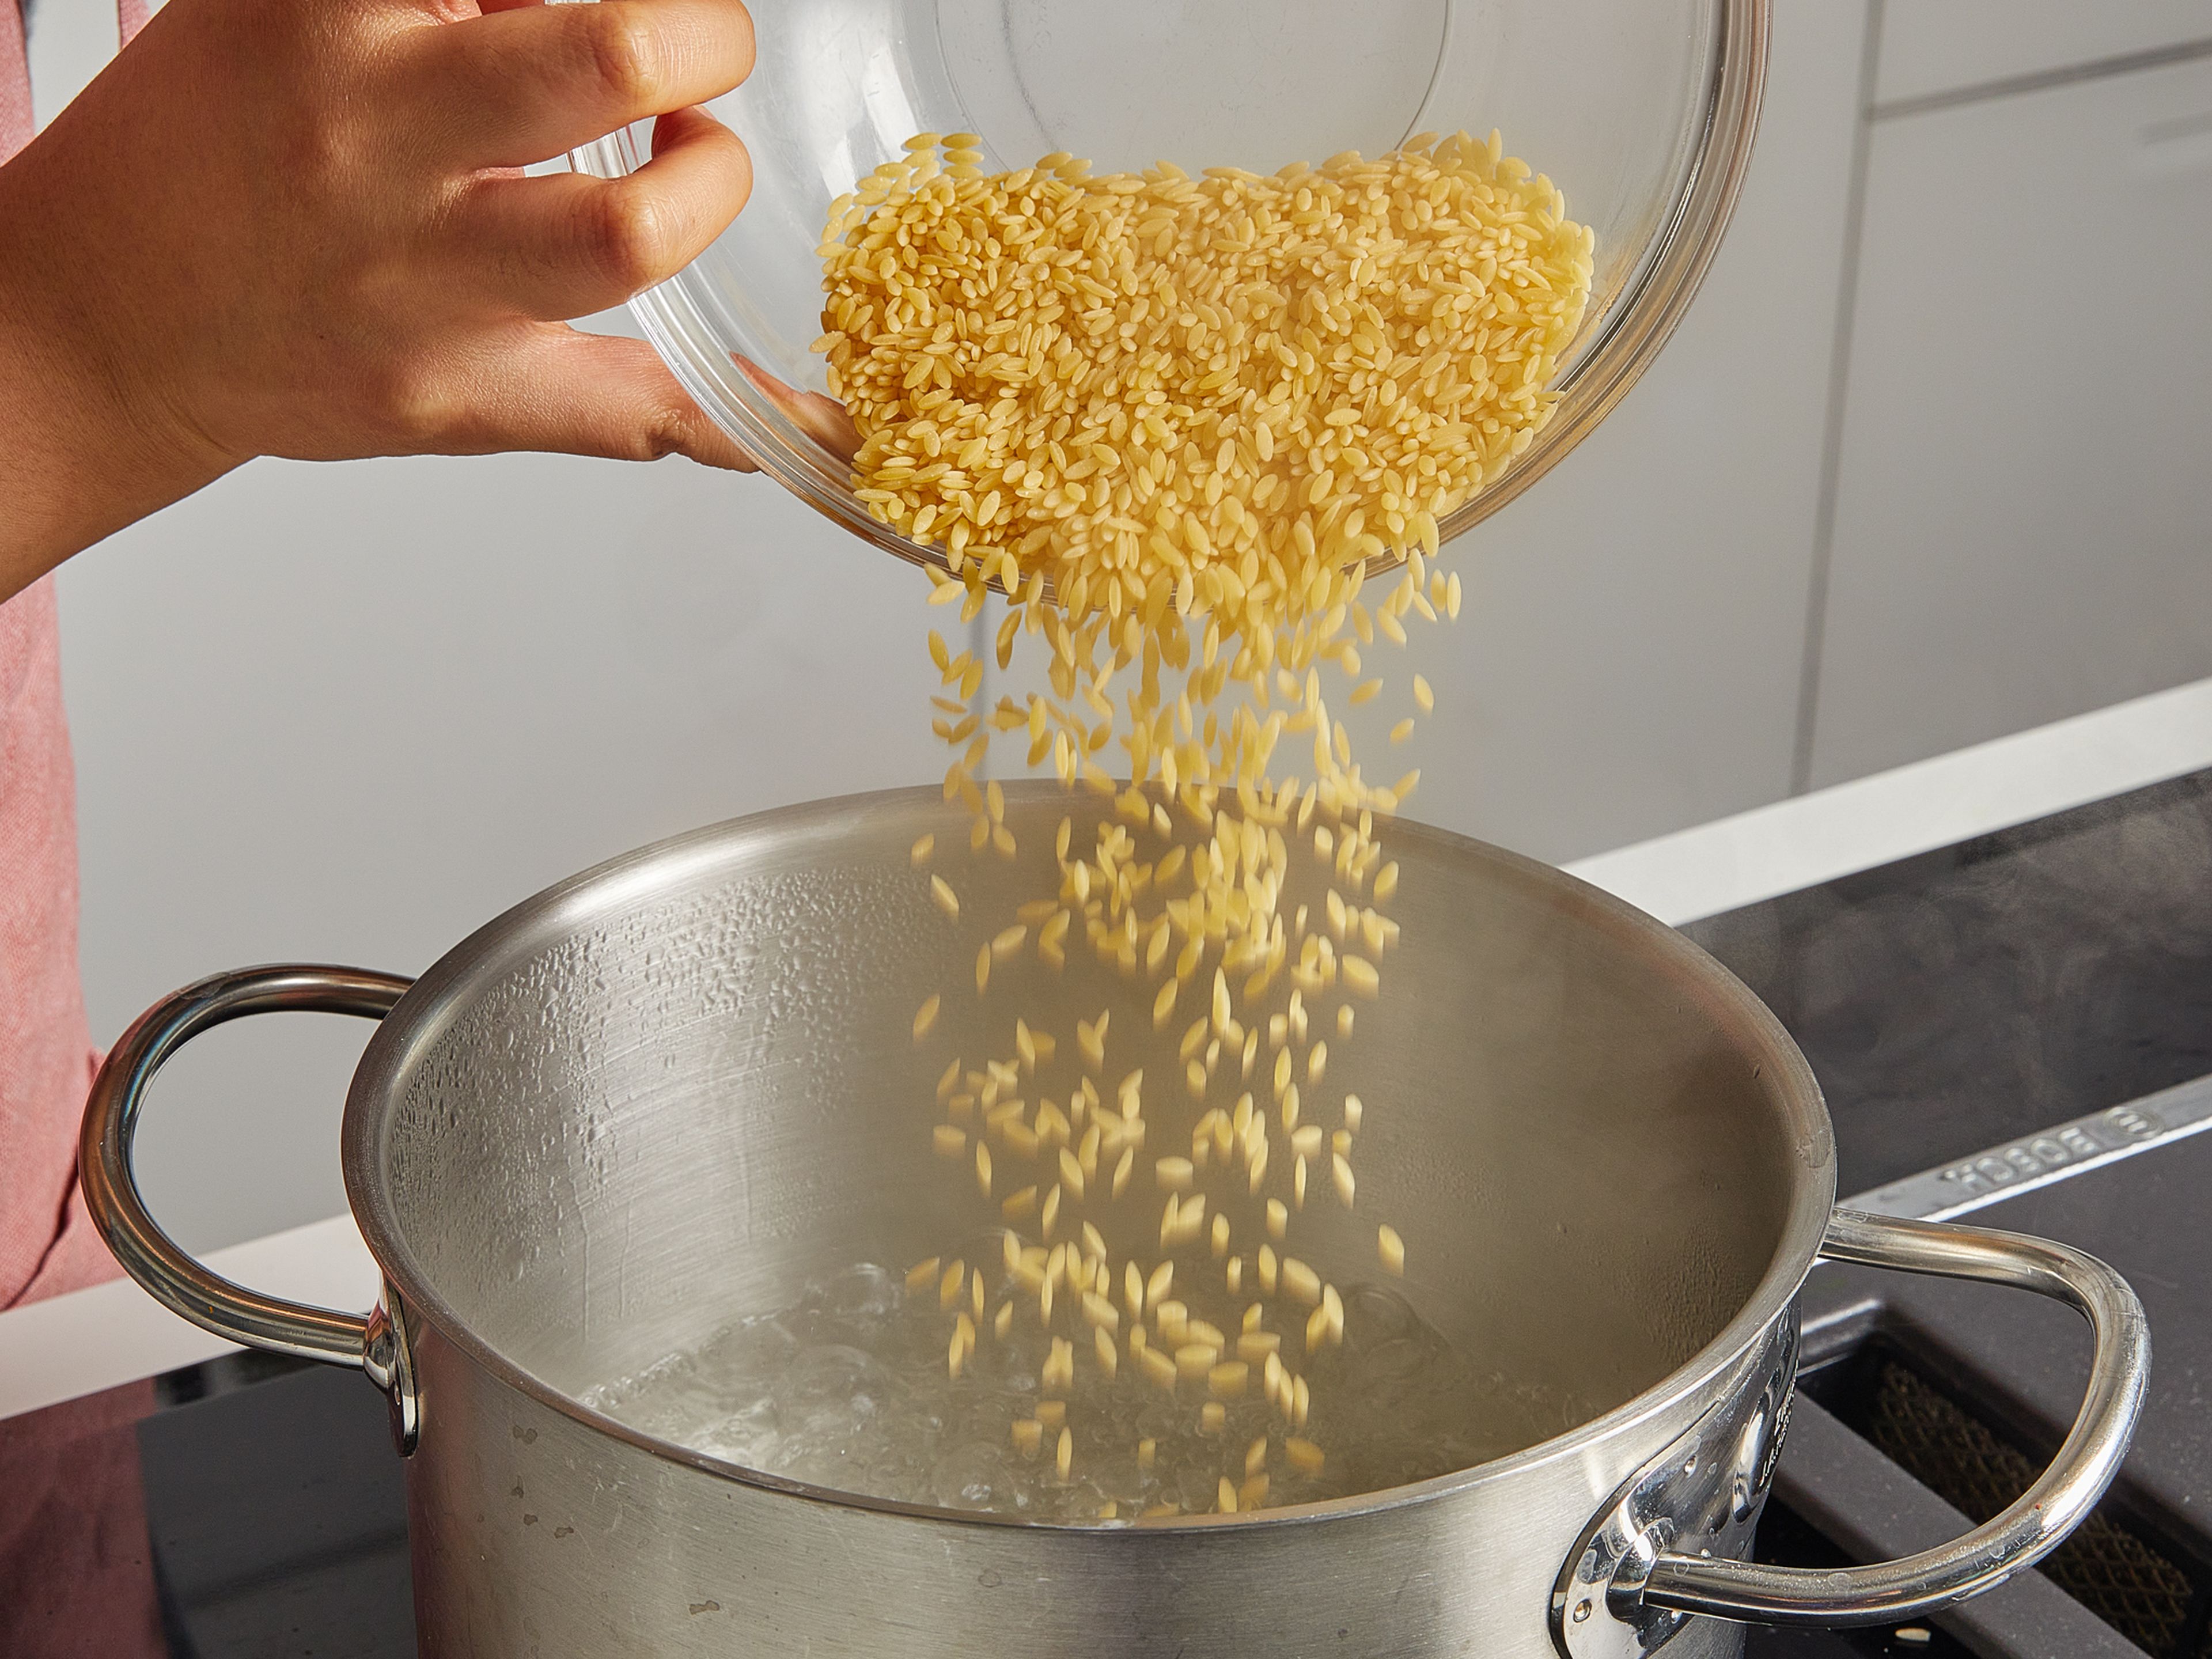 Meanwhile, in a large pot without oil, toast the almonds over medium heat until golden brown. Then take them out, roughly chop, and put them aside. Then, in the same pot, bring water to a boil and cook orzo pasta according to package directions until al dente.